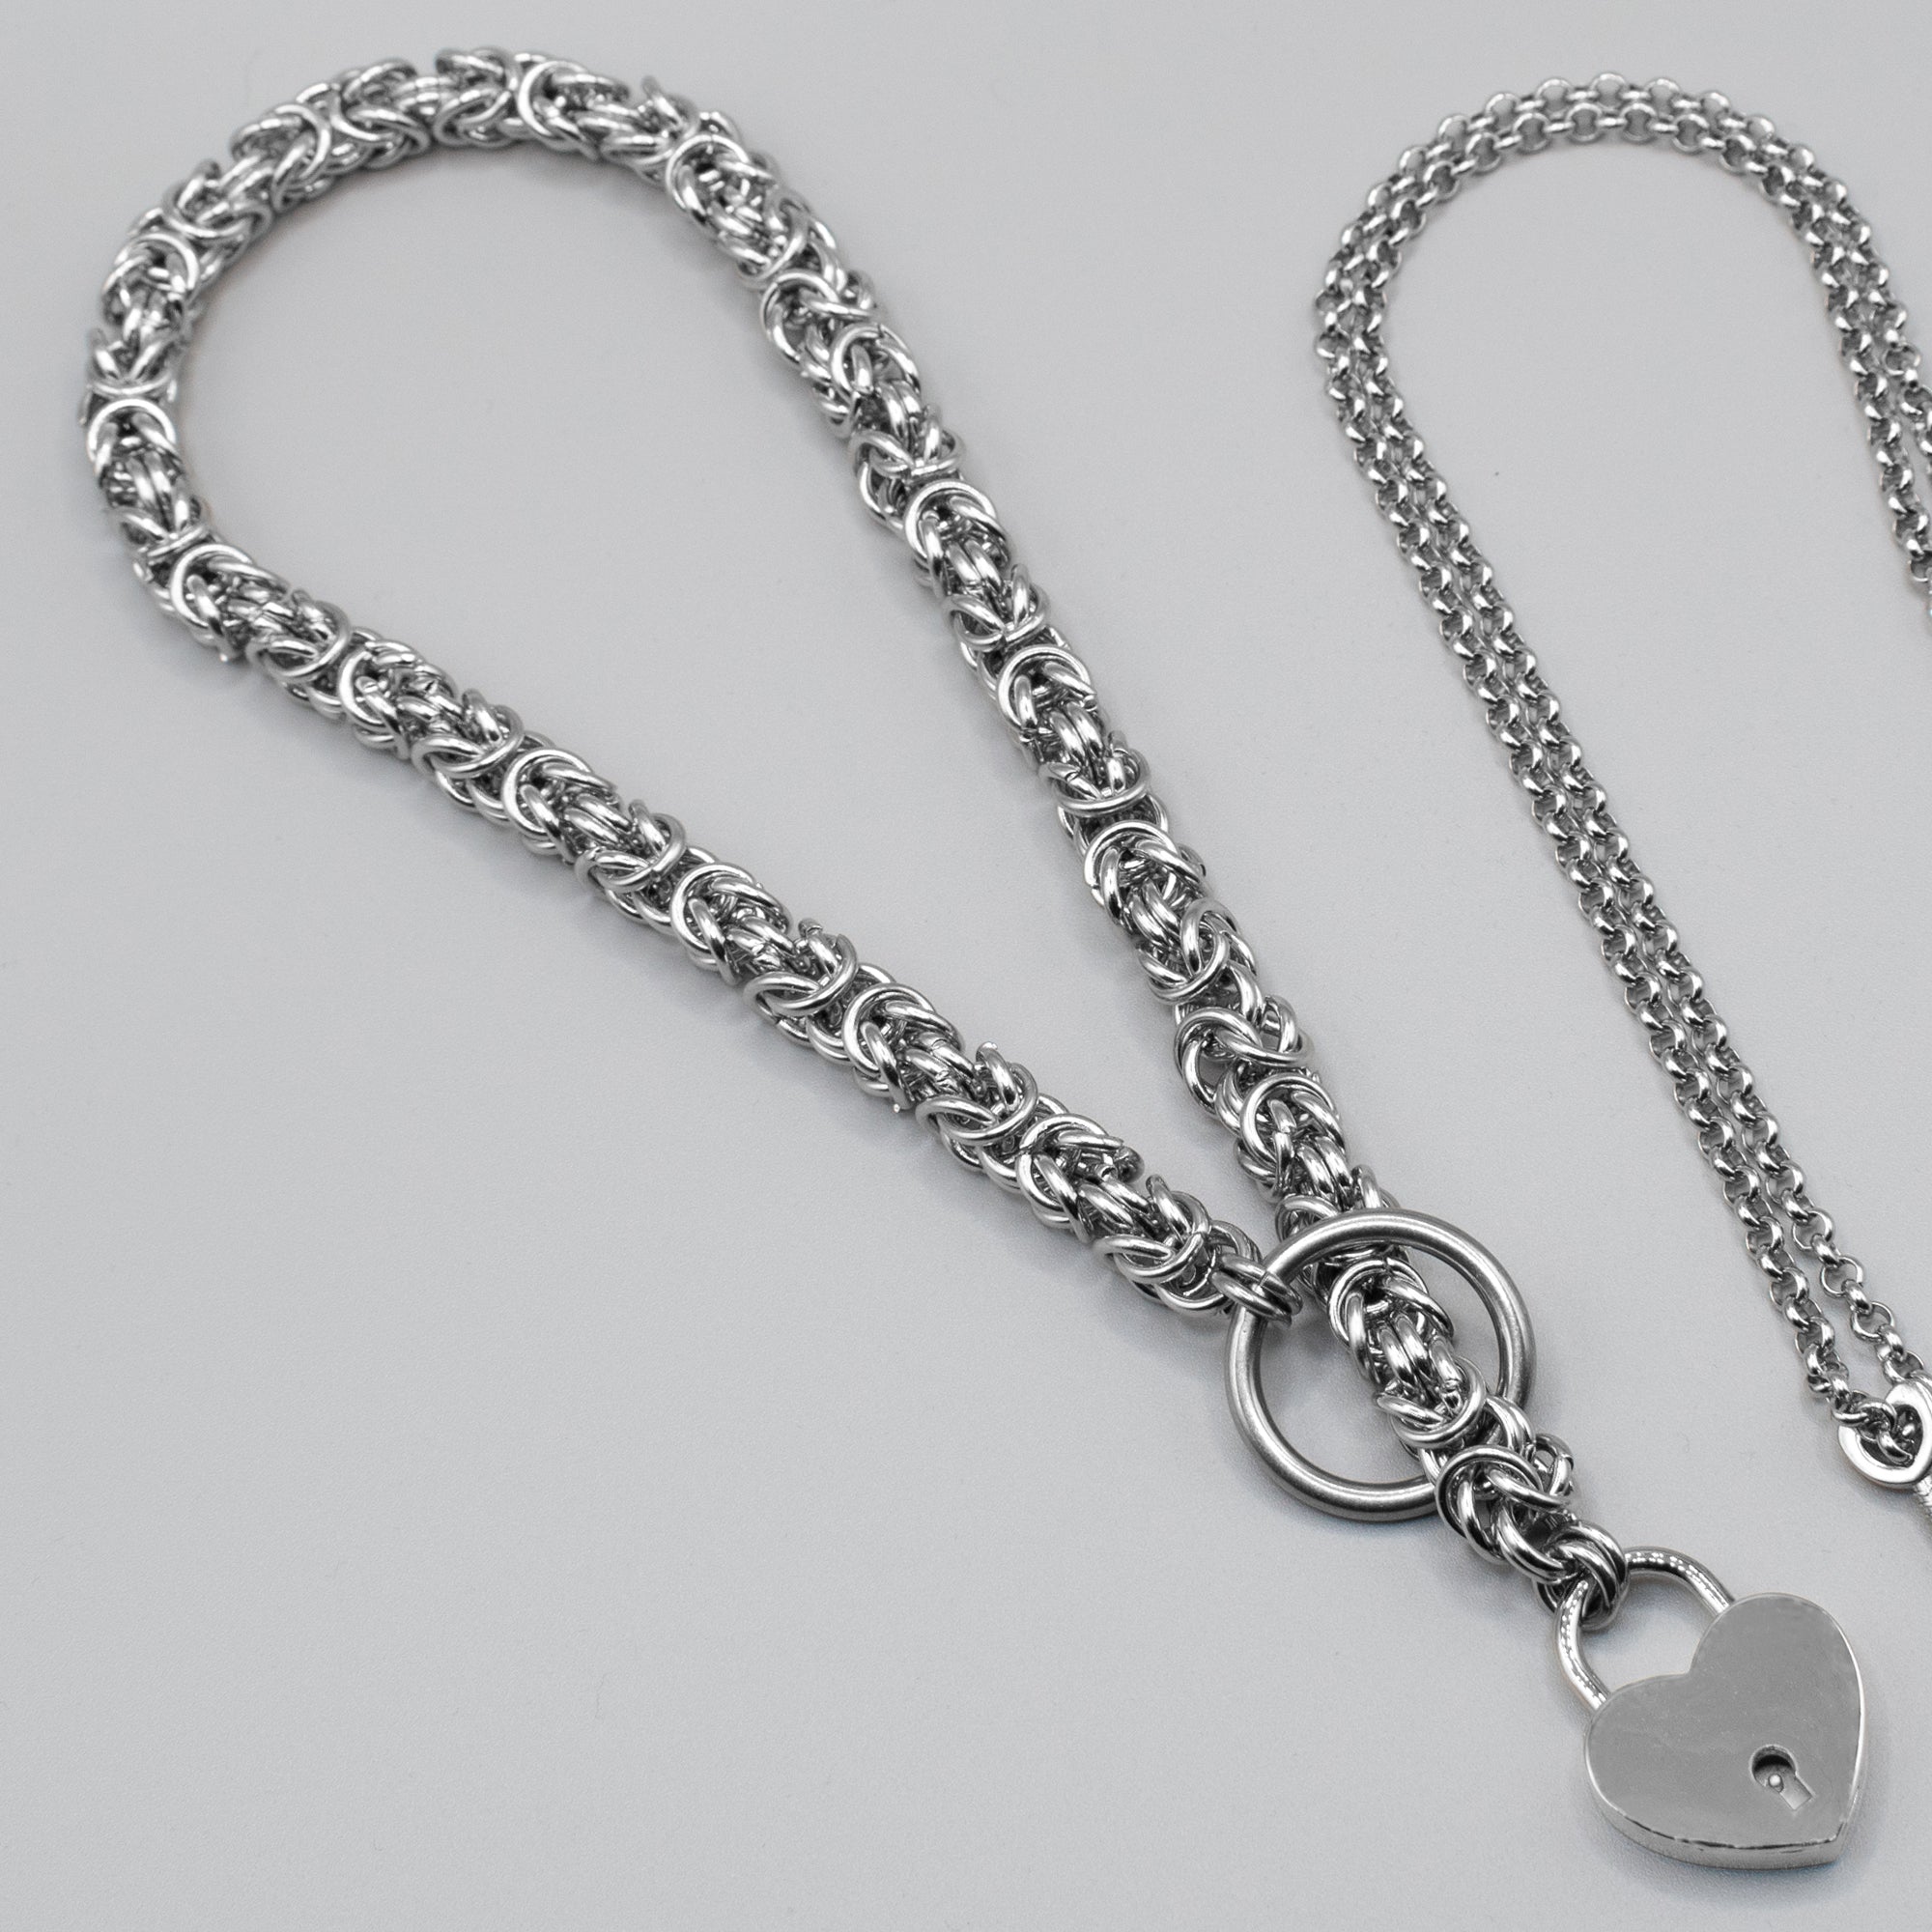 Chunky 12mm chain mail style O ring choker, slip chain style necklace with working heart shaped padlock and key chain 